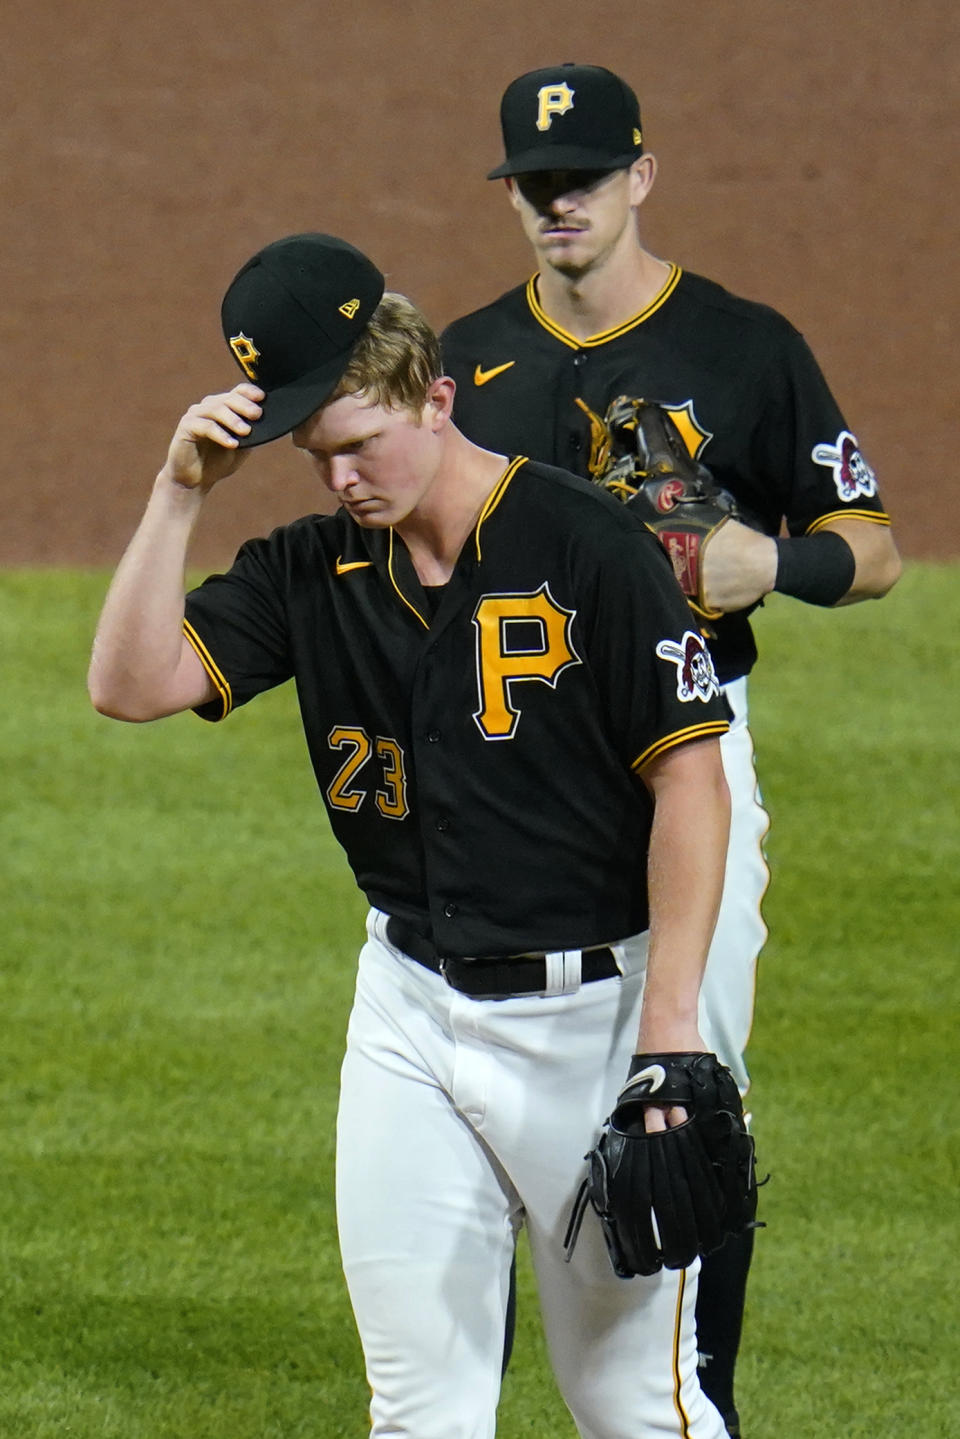 Pittsburgh Pirates starting pitcher Mitch Keller (23) waits to hand the ball to manager Derek Shelton and leave the game, during the fifth inning of a baseball game against the Chicago Cubs in Pittsburgh, Tuesday, Sept. 28, 2021. (AP Photo/Gene J. Puskar)